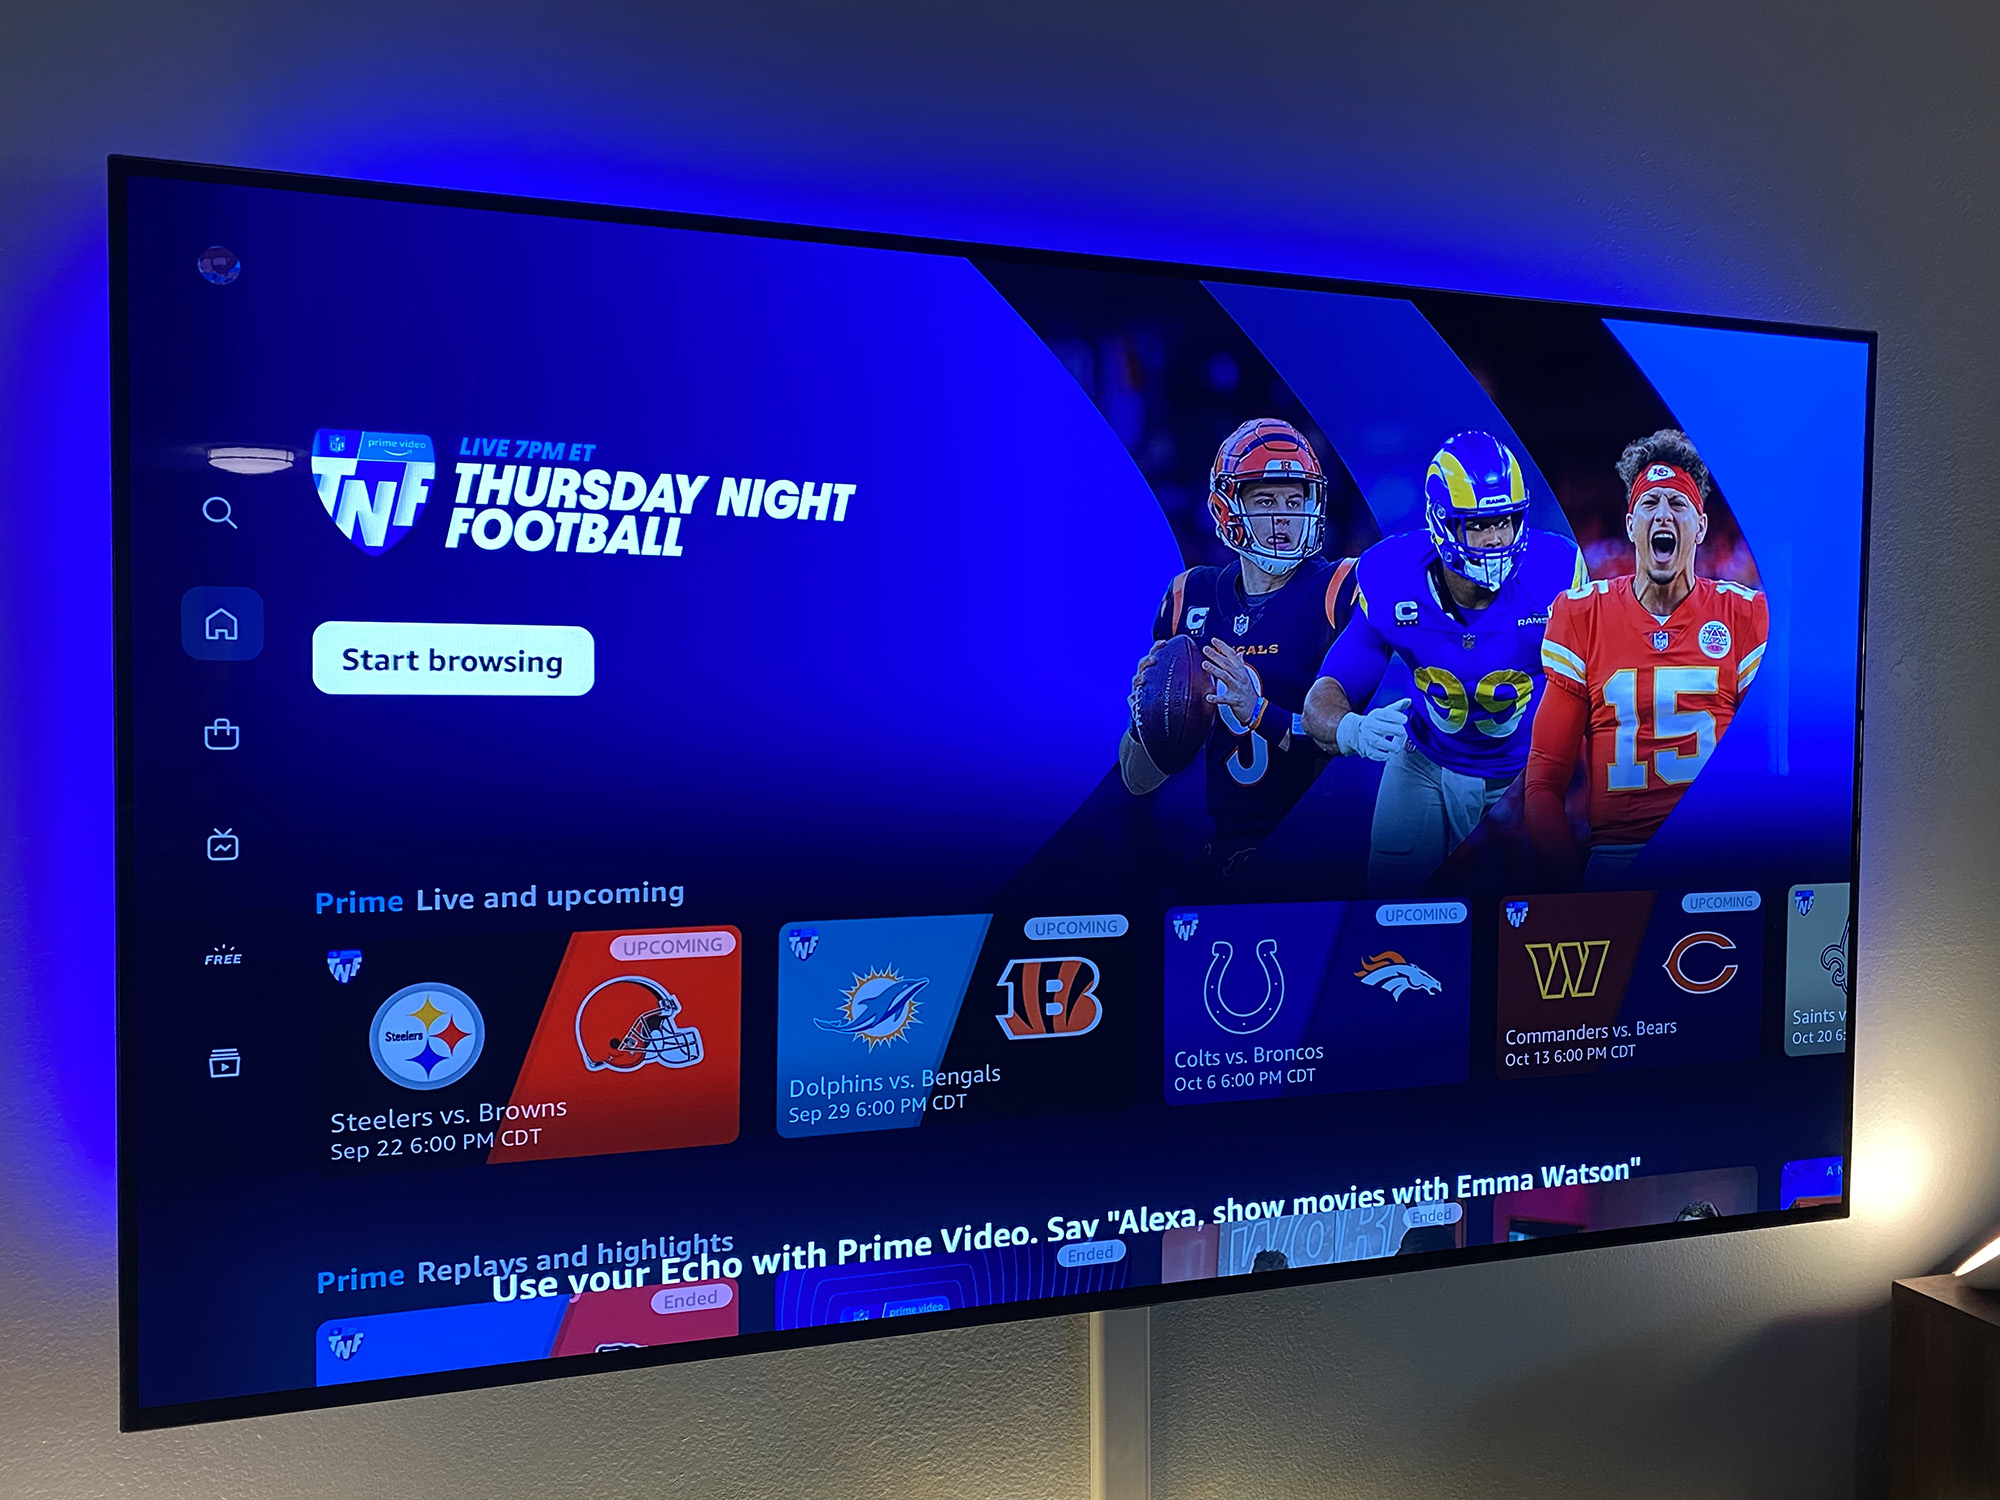 How to watch NFL Thursday Night Football on  Prime in 2022